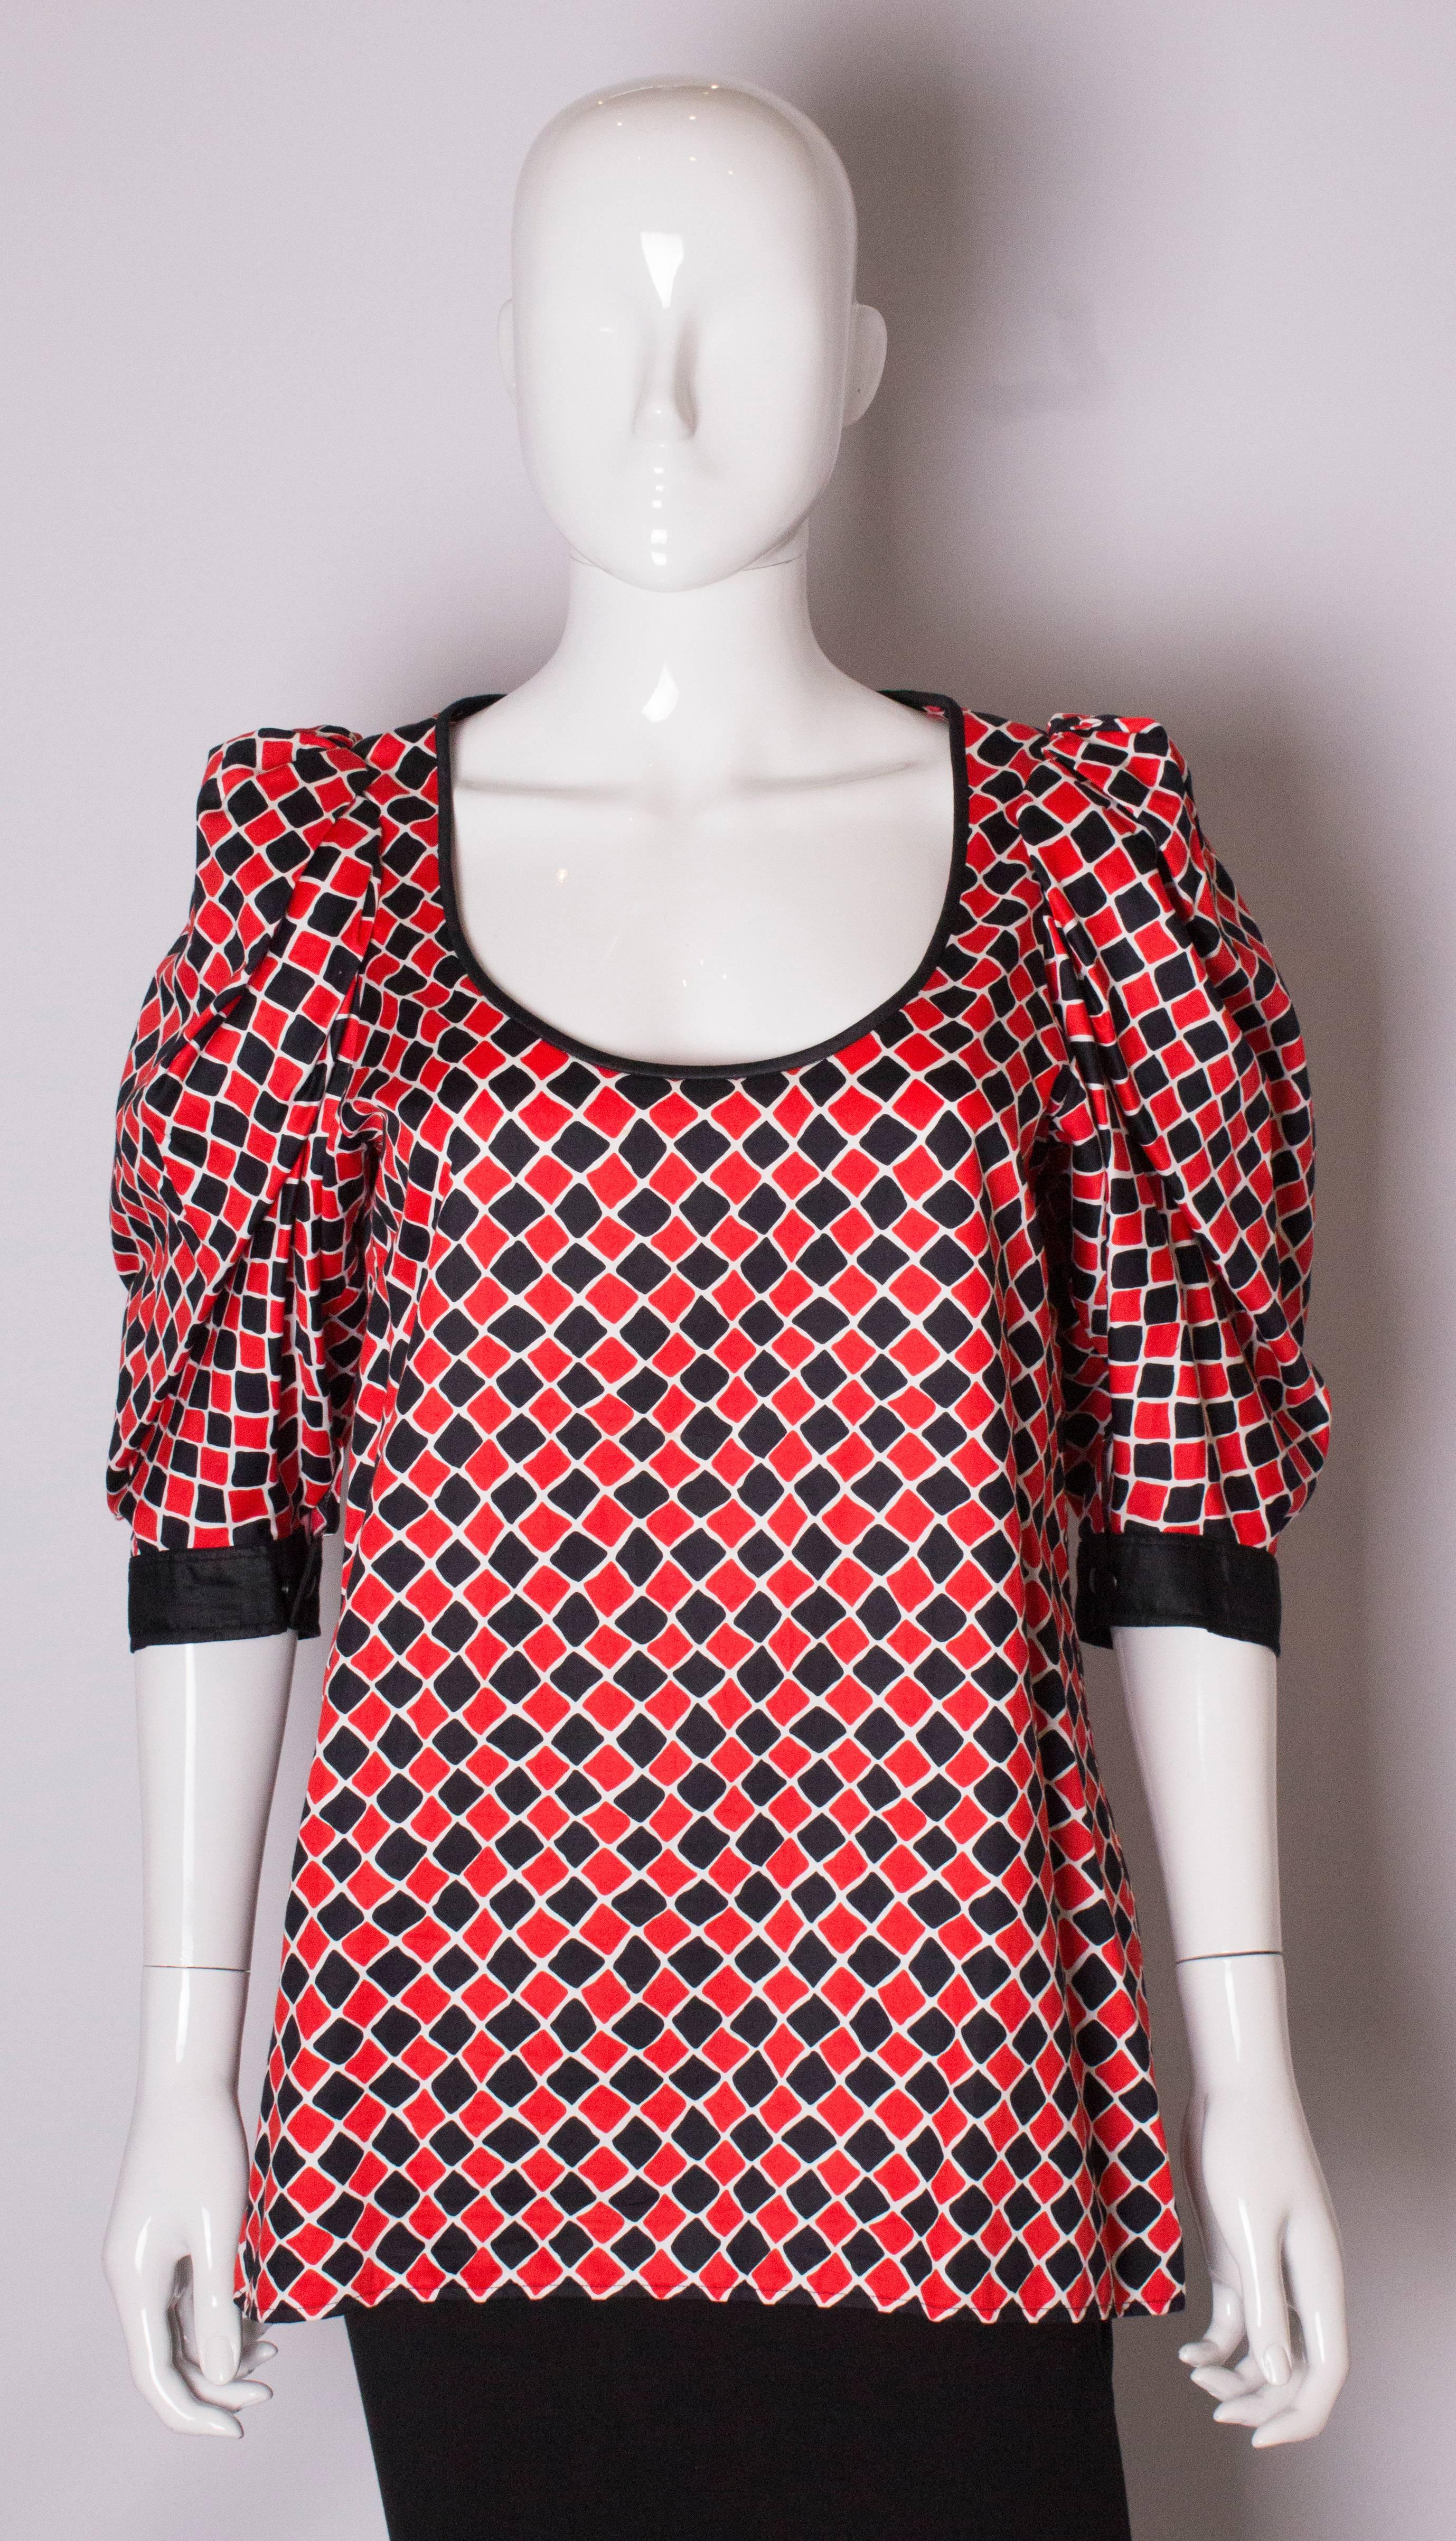 A chic and easy to wear top by Yves Saint Laurent, Rive Gauche. The top has a scoop neckline, a white background with a black and red diamond print, black edging, and elbow length sleeves with double buttons.